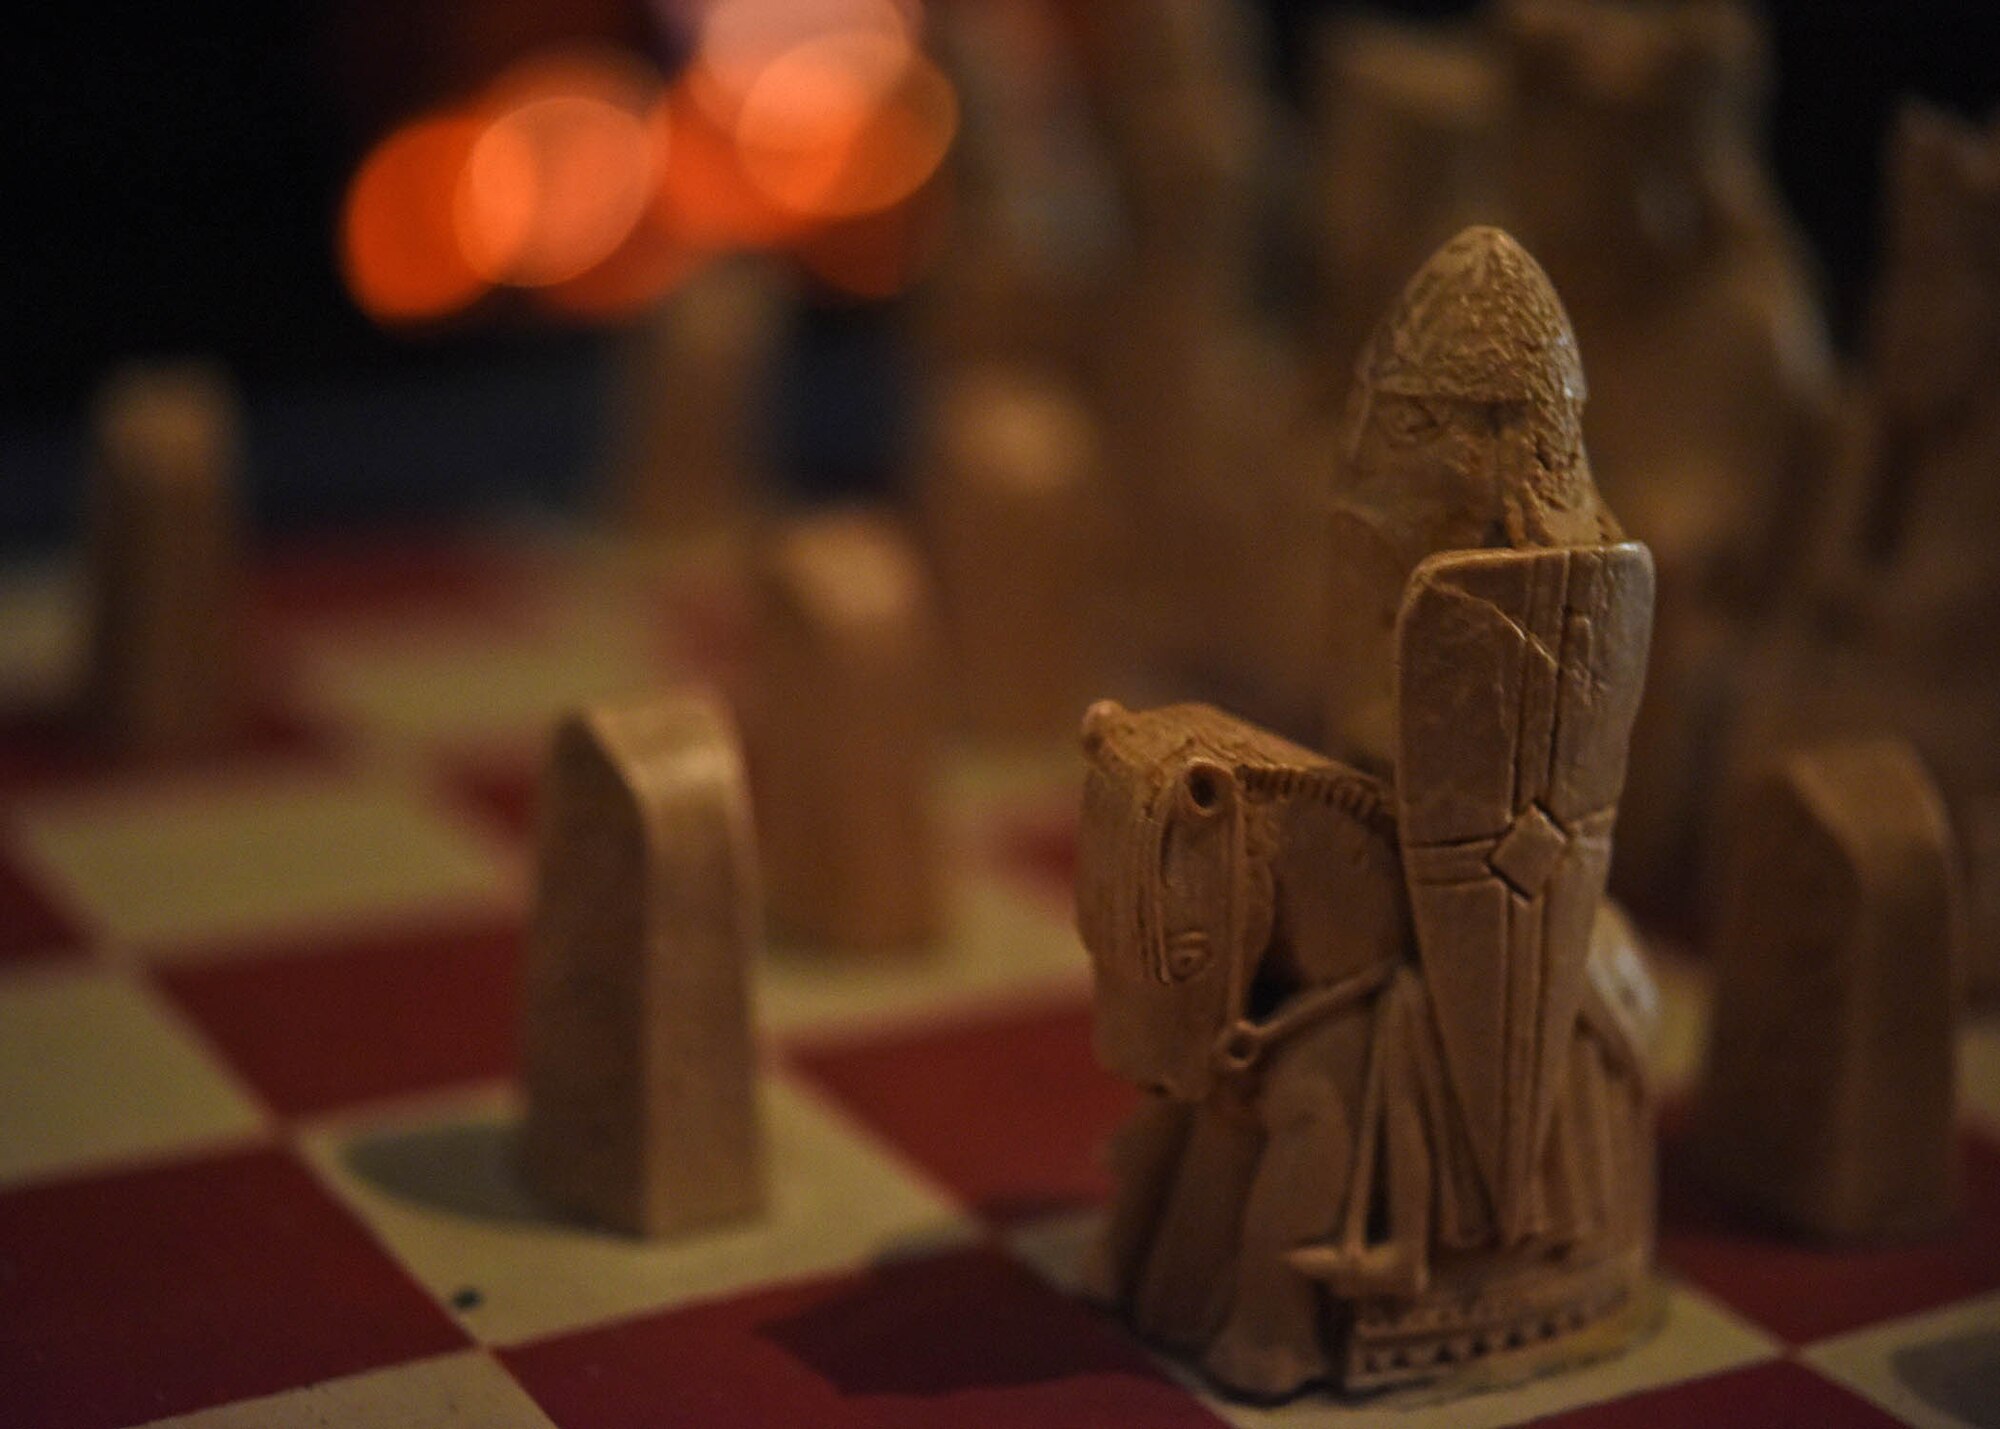 A chess piece used in a representation of the king’s chamber at Dover Castle during a resiliency trip for Team Mildenhall Airmen to Dover, England, Sept. 7, 2018. The resiliency trip offered an insight to the Airmen through the long history within its walls. (U.S. Air Force photo by Senior Airman Luke Milano)